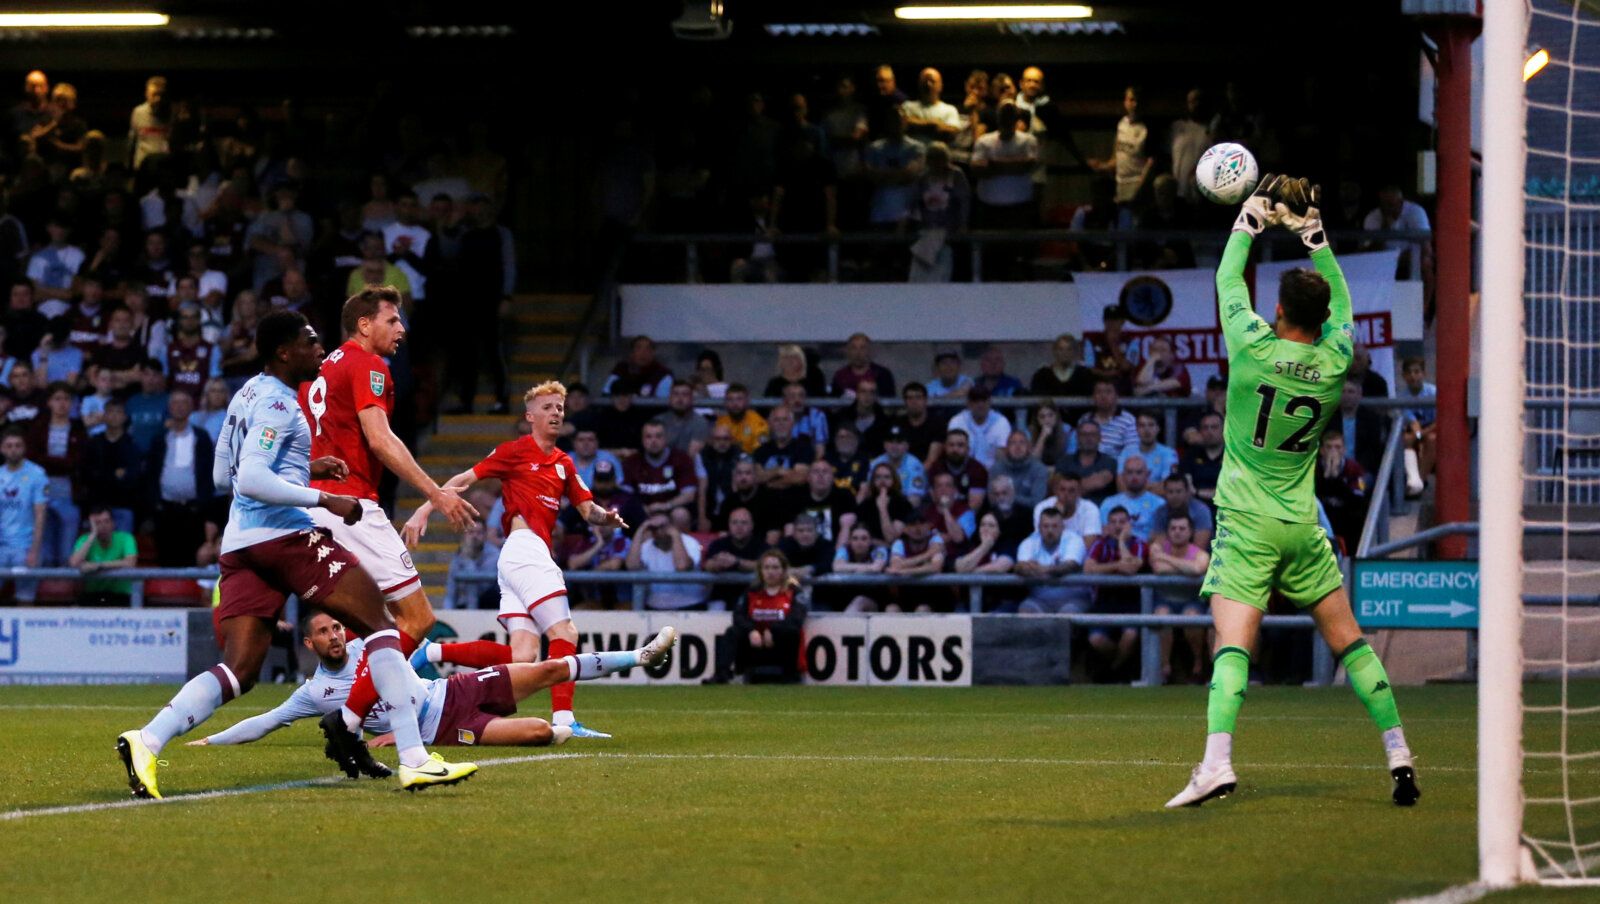 Soccer Football - Carabao Cup Second Round - Crewe Alexandra v Aston Villa - The Alexandra Stadium, Crewe, Britain - August 27, 2019  Aston Villa's Jed Steer saves a shot from Crewe Alexandra's Charlie Kirk     Action Images via Reuters/Ed Sykes  EDITORIAL USE ONLY. No use with unauthorized audio, video, data, fixture lists, club/league logos or 